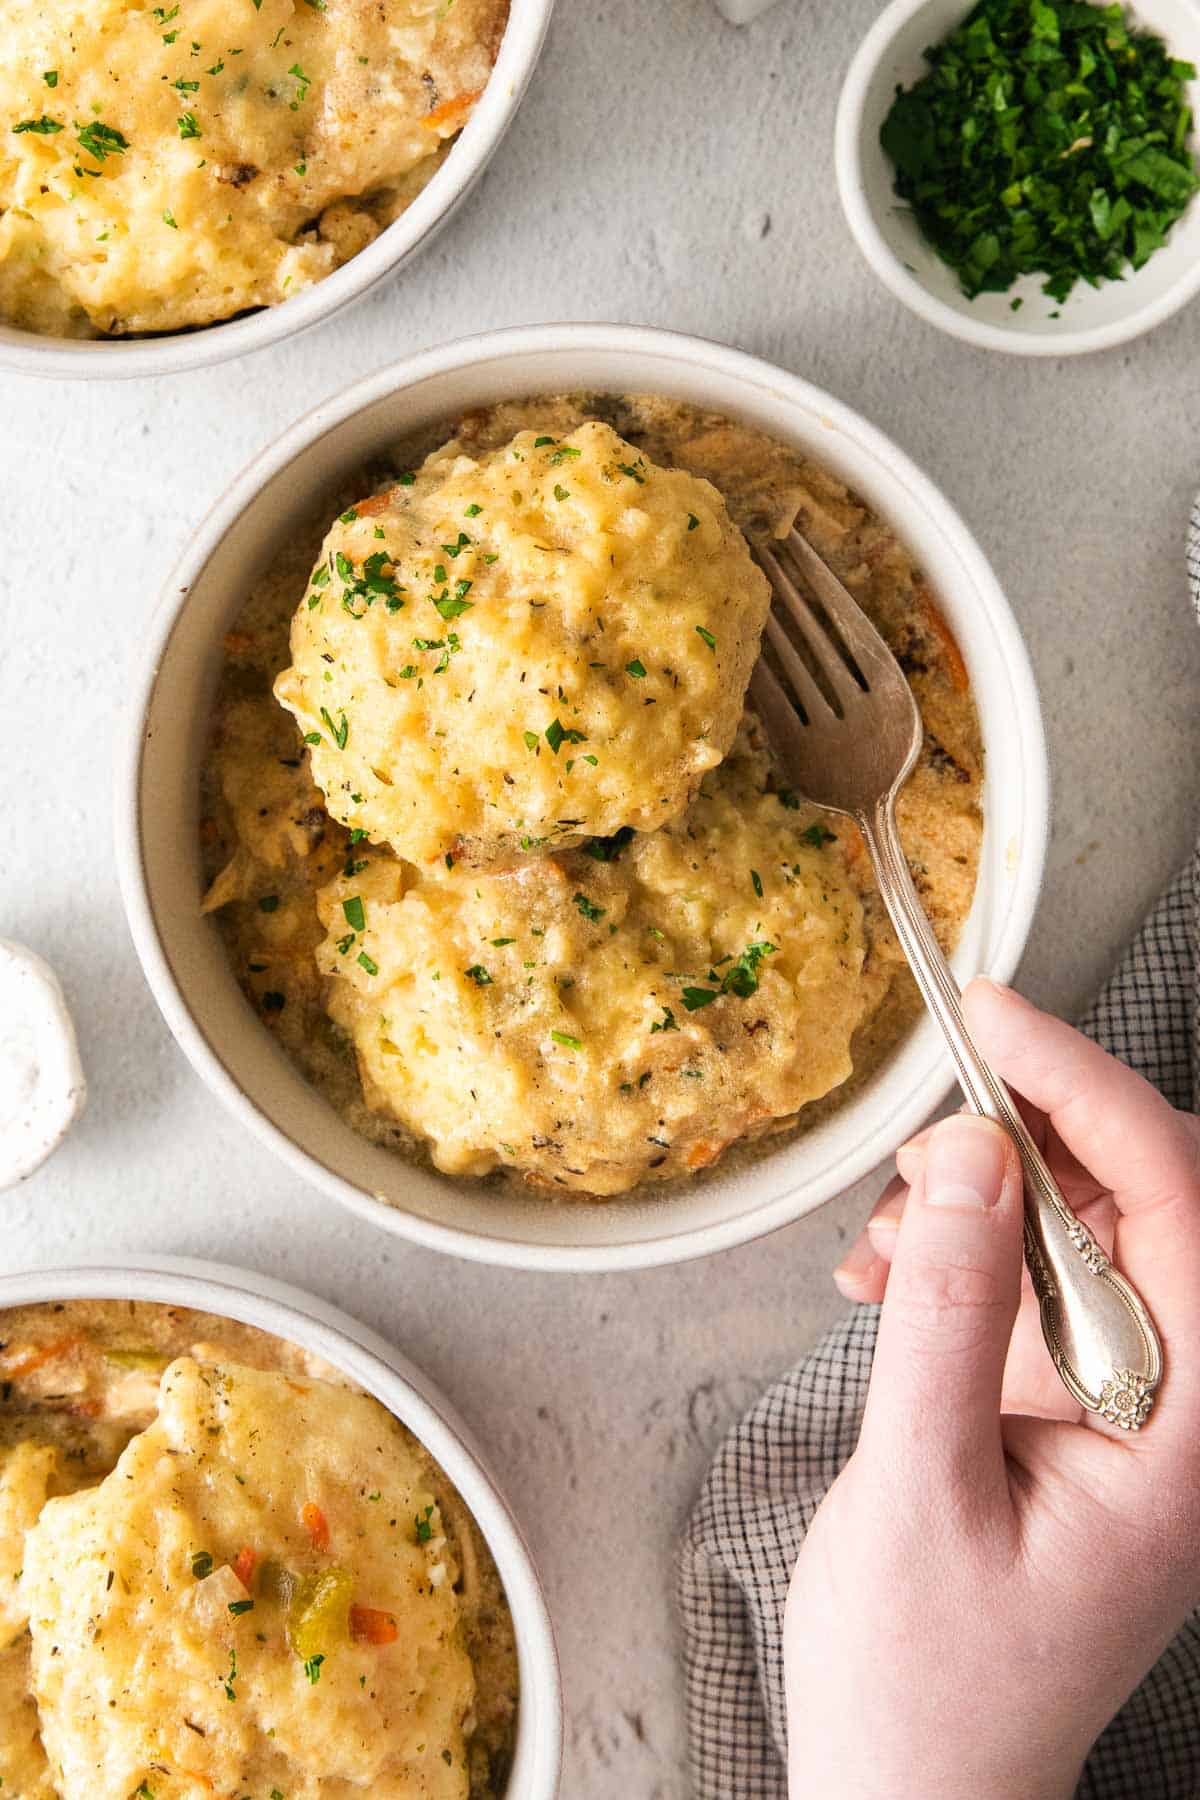 Chicken and dumplings in a bowl, and a hand with a fork scooping into the bowl